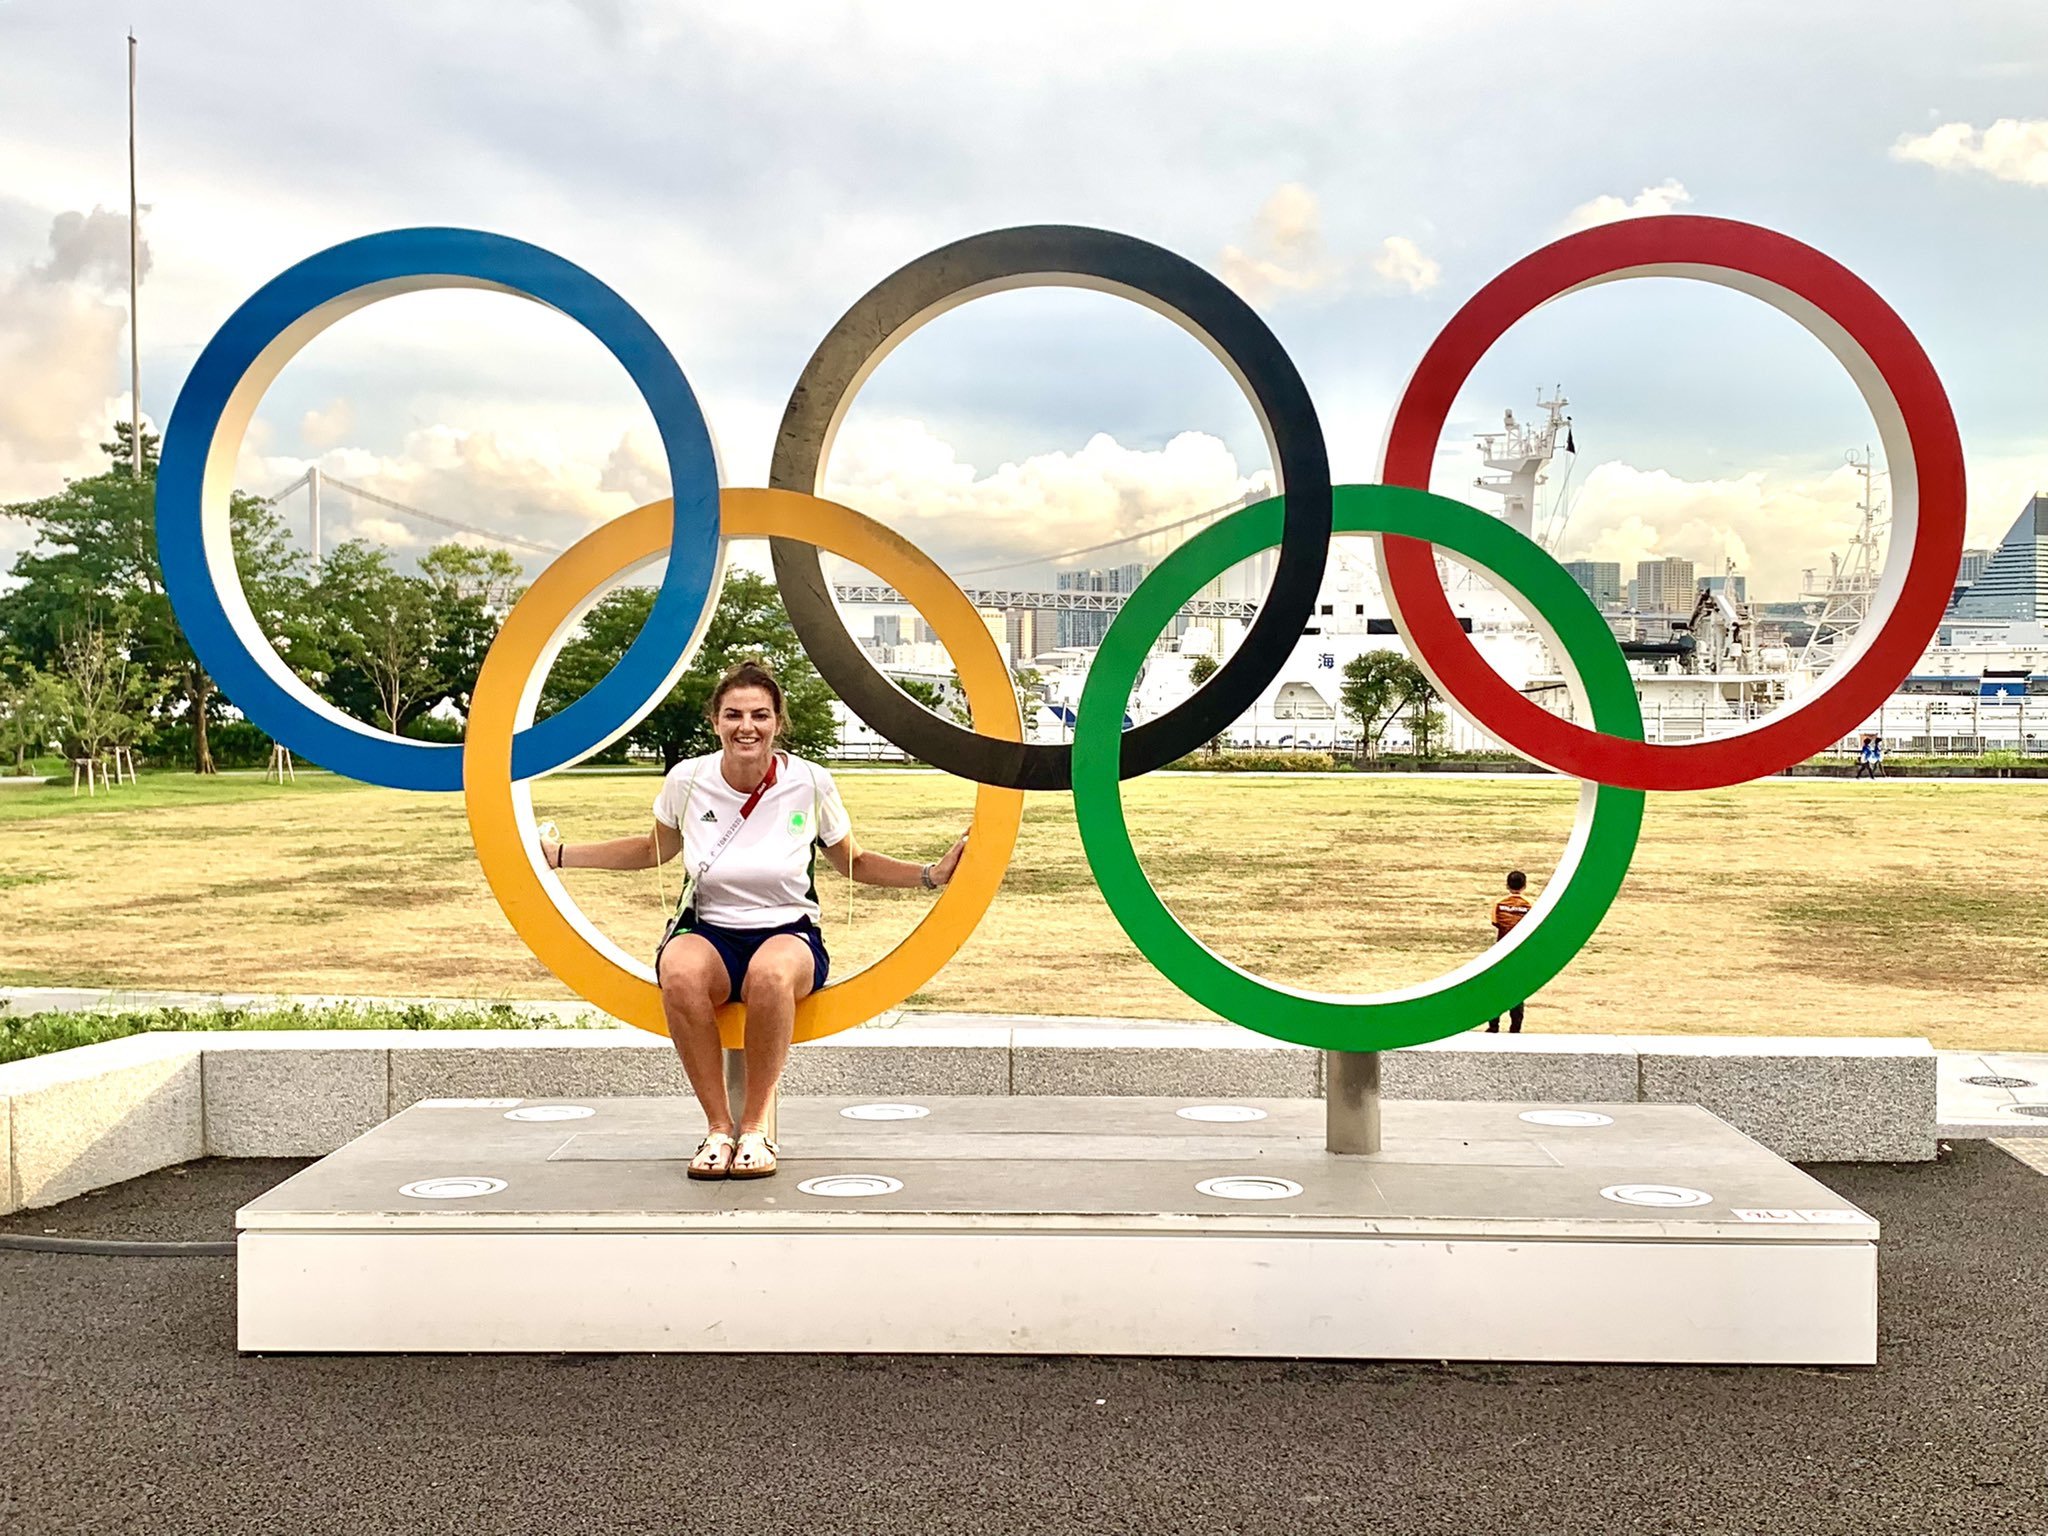 Wrexham Glyndwr University student Dr Ciara Losty, who was a member of the support staff for Team Ireland at the 2020 Olympic Games in Tokyo.